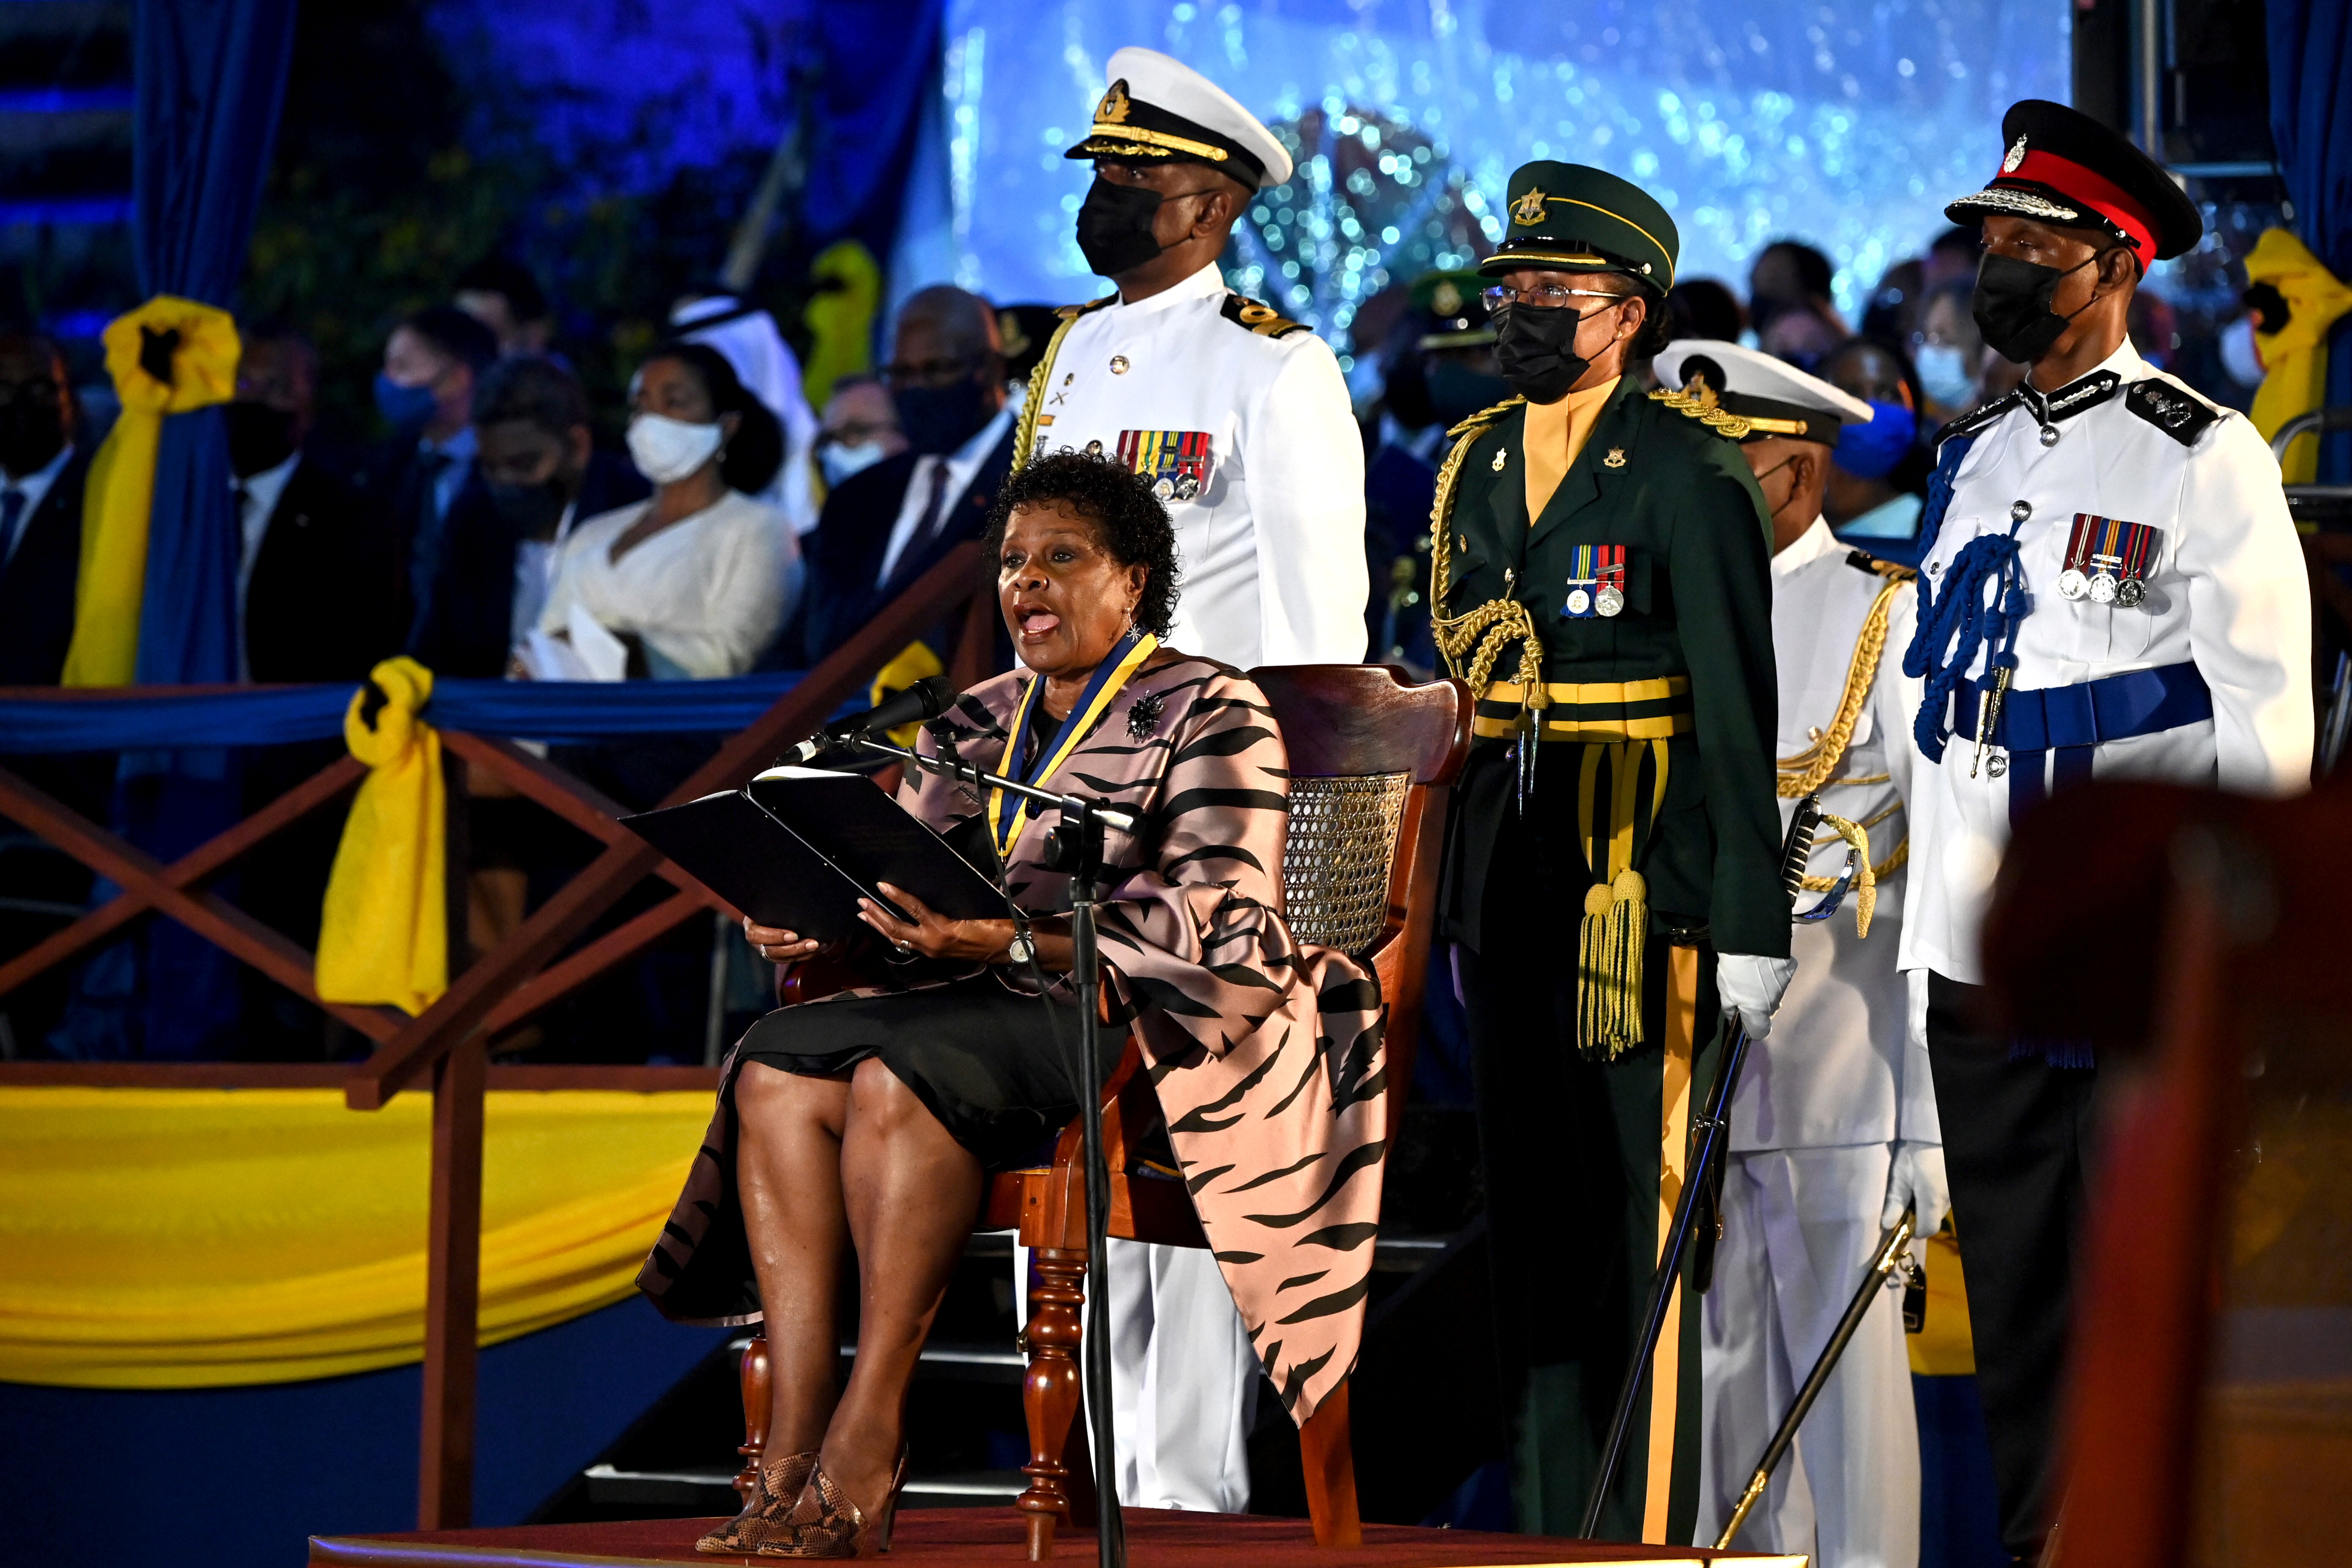 Barbados President Sandra Mason speaks during the Presidential Inauguration Ceremony to mark the birth of a new republic in Barbados at Heroes Square in Bridgetown, Barbados, November 30, 2021. Jeff J Mitchell/Pool via REUTERS